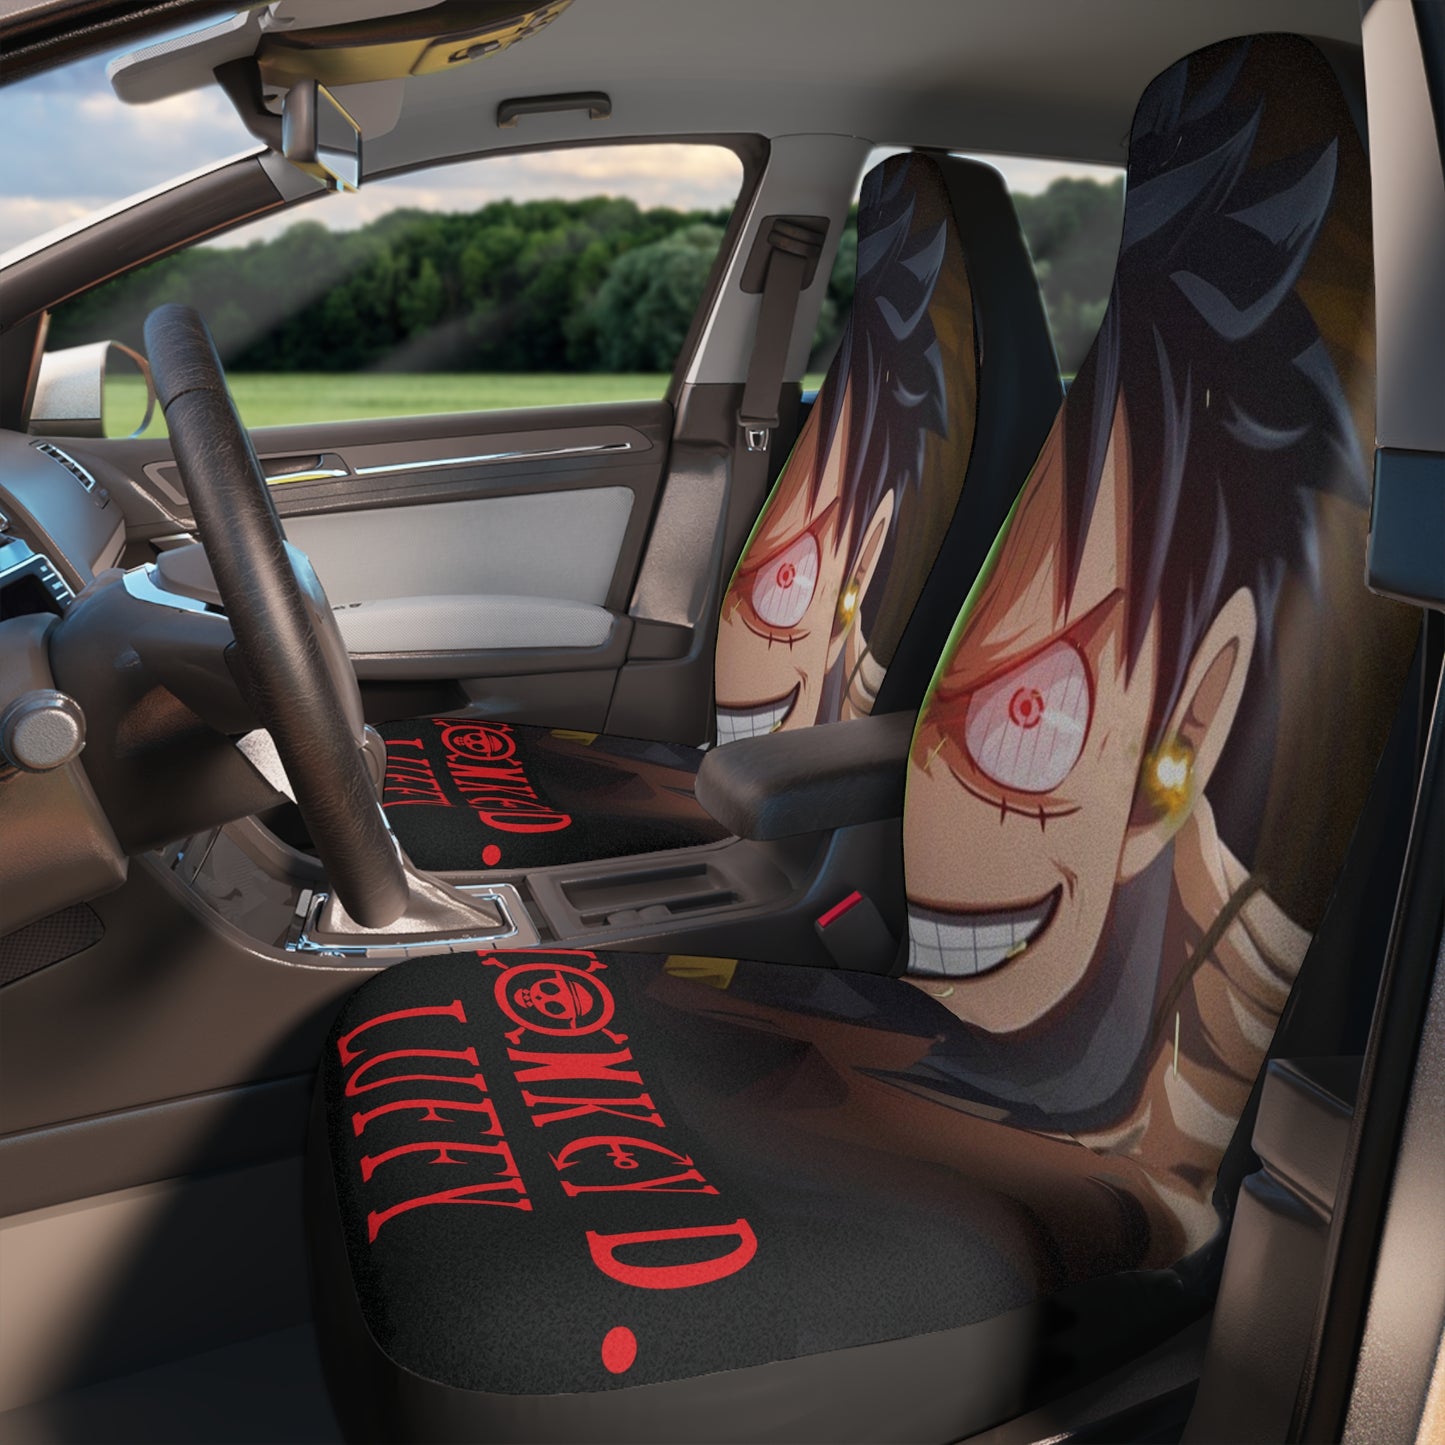 One Piece Luffy Smiles Car Seat Covers